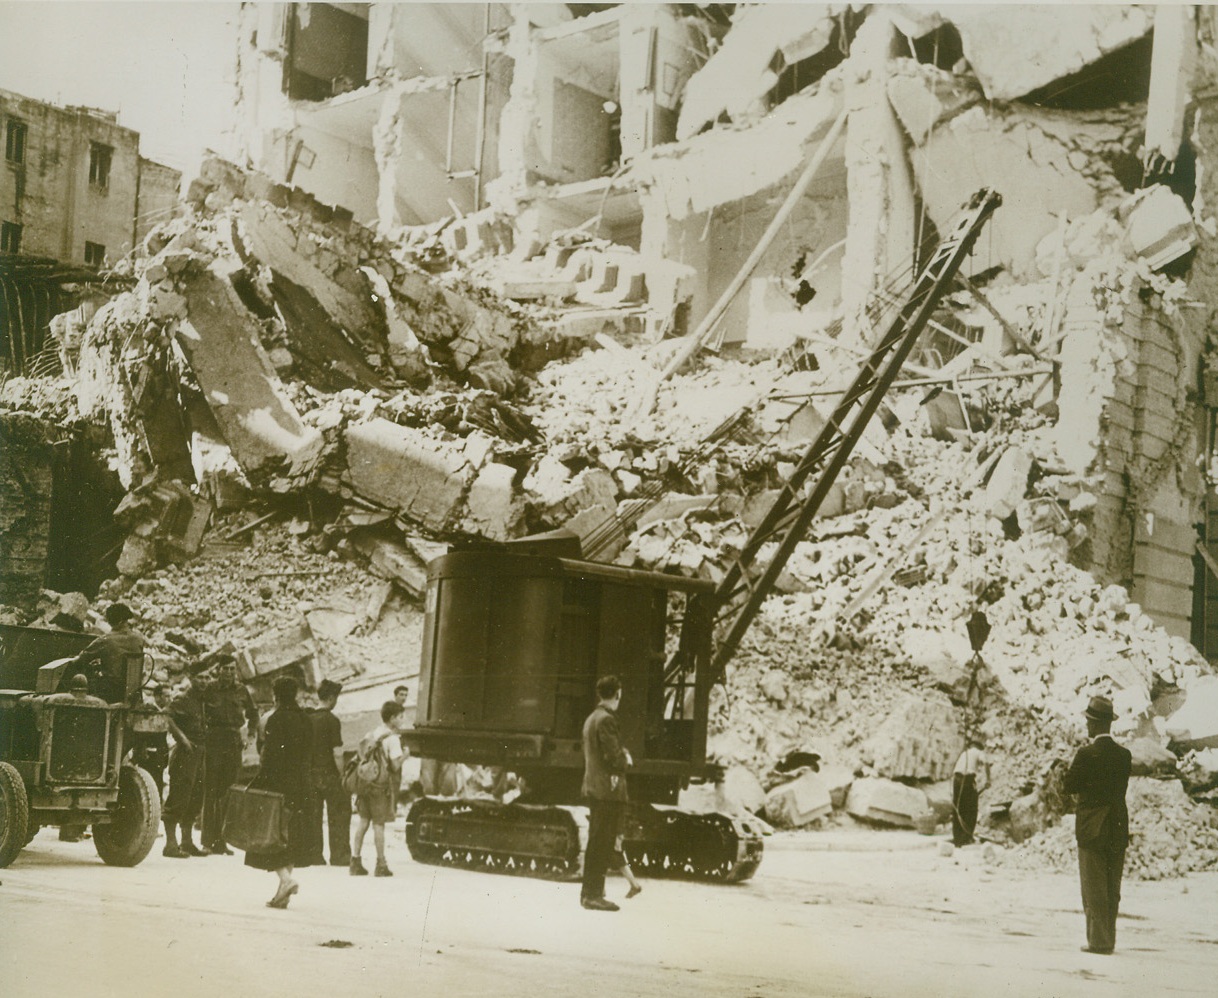 Cleaning up Naples, 11/2/1943. NAPLES, ITALY – Working with crane and dump trucks, Allied engineers clear away debris from bombed buildings in Naples. The work of rehabilitating the city goes on while fighting Allied troops push on to the north. Credit (PWB Photo from OWI via Acme);